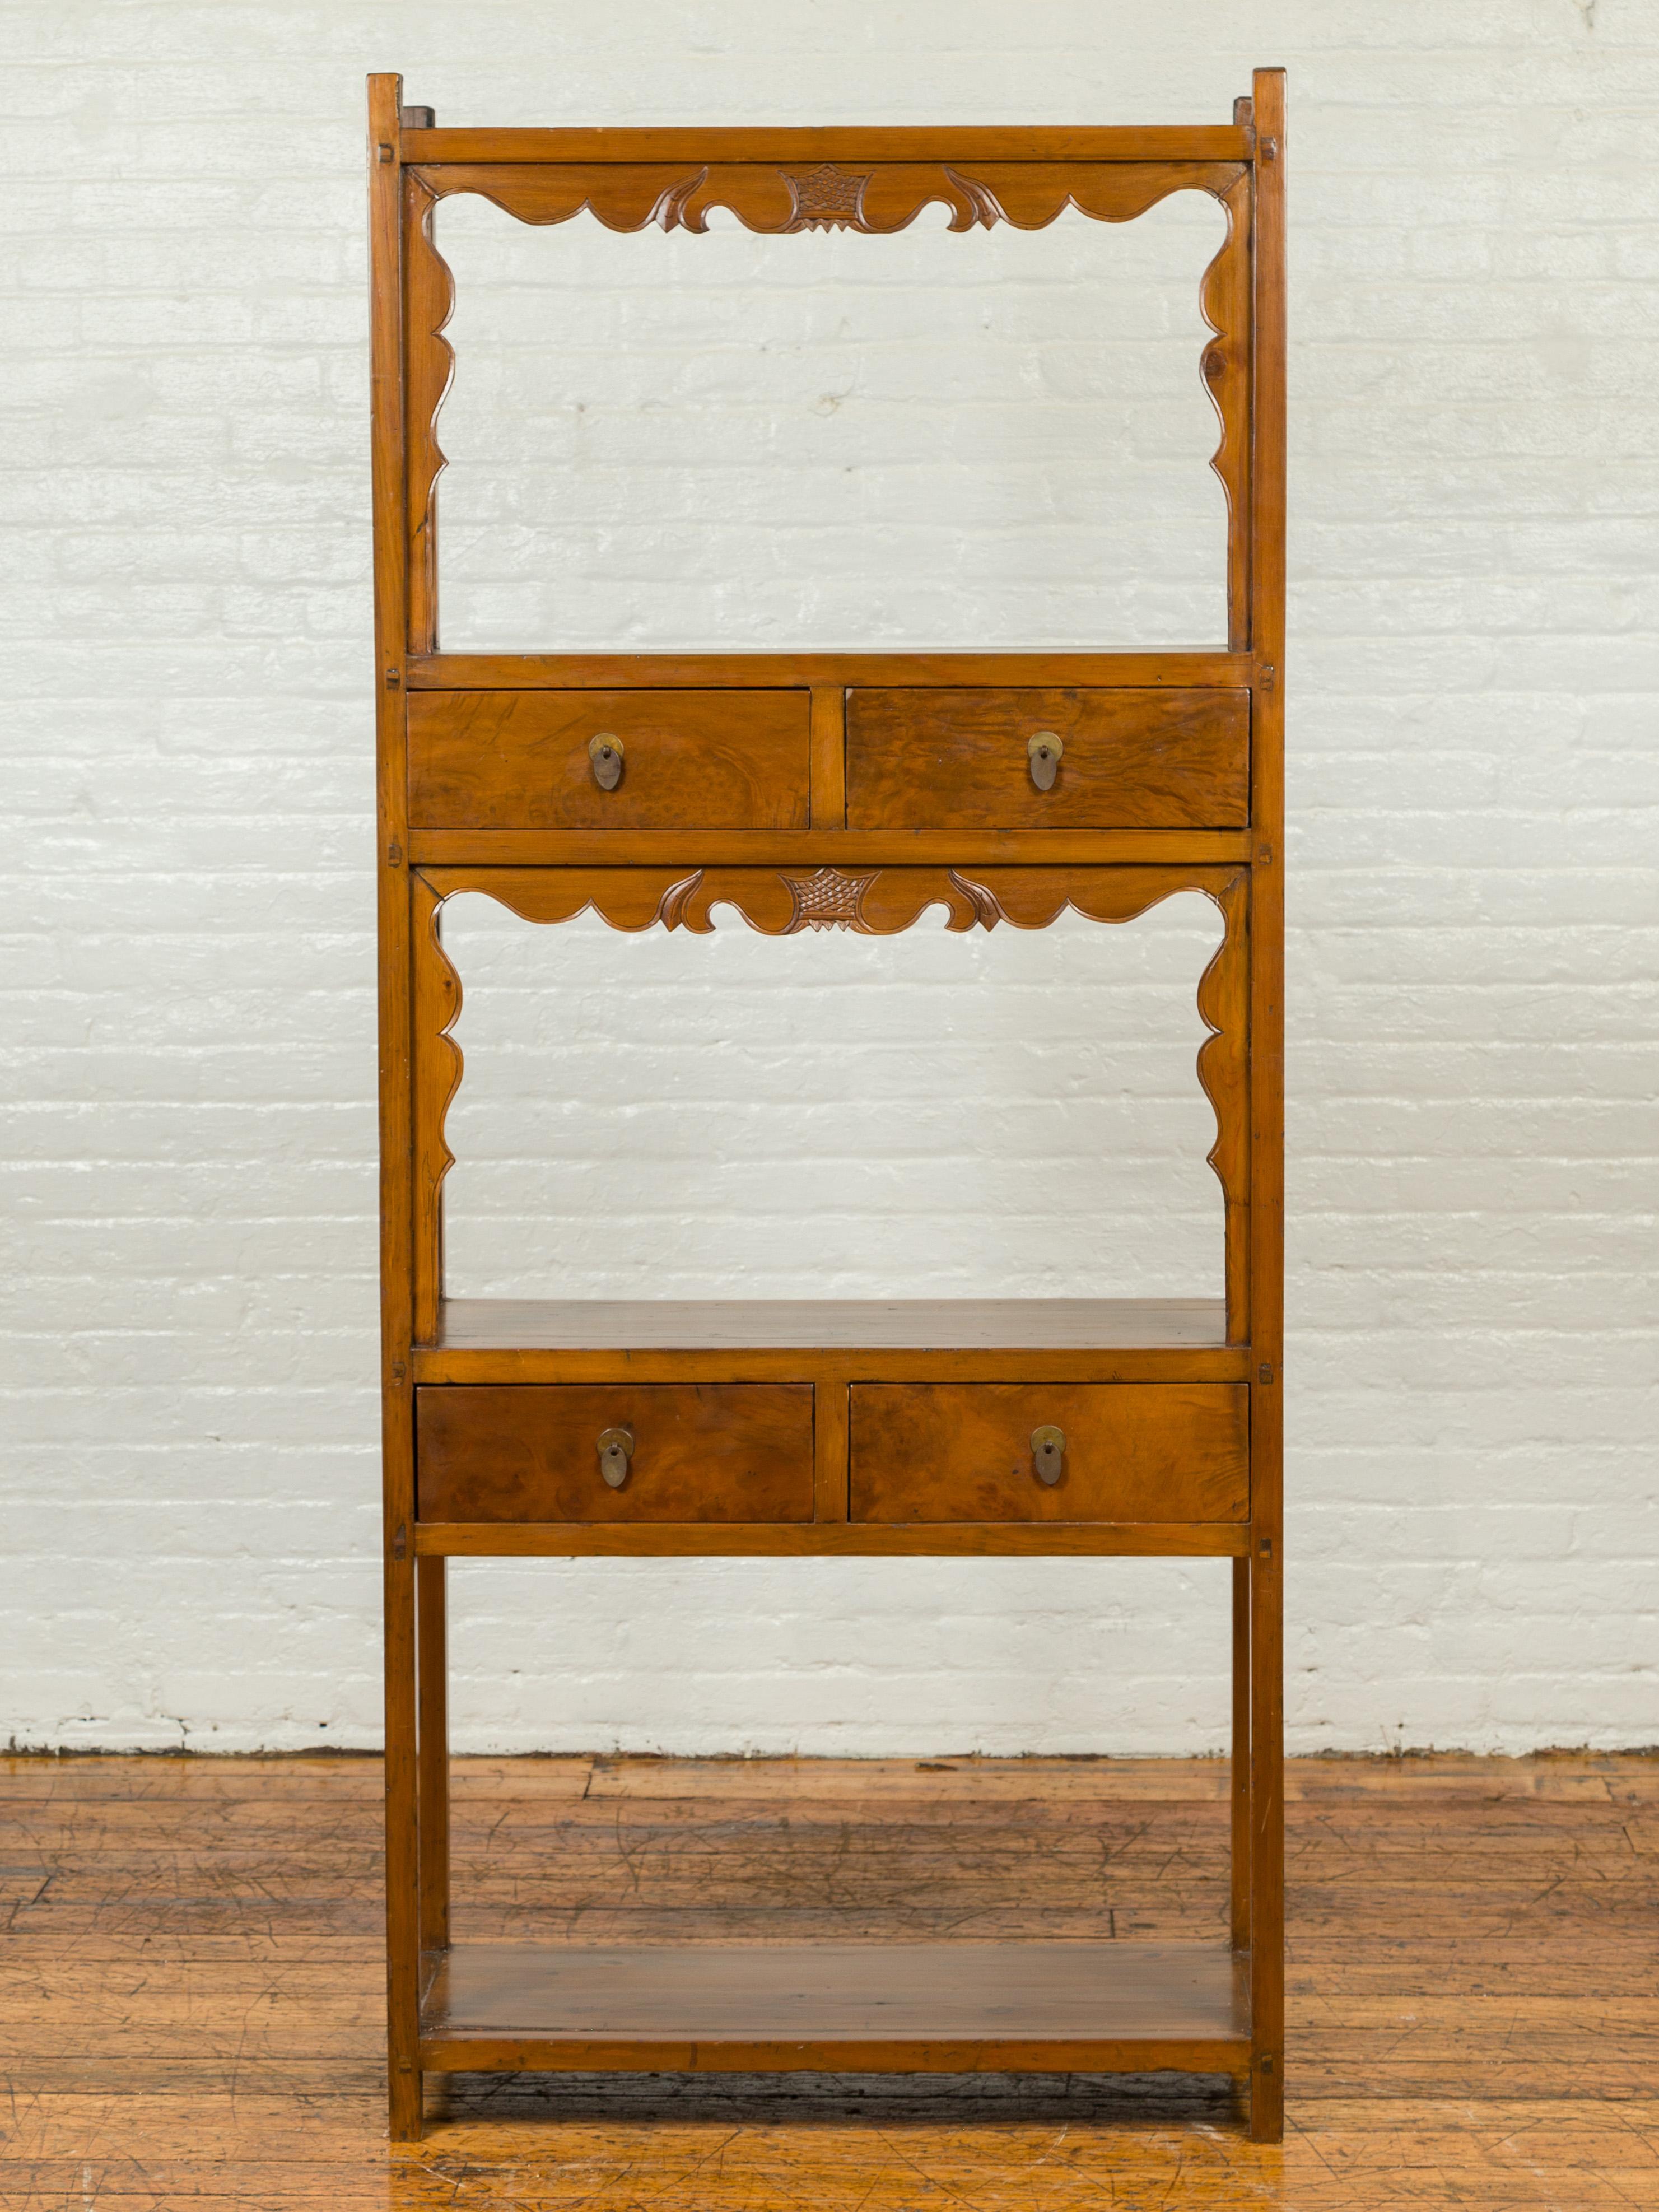 A Chinese Qing dynasty elmwood bookcase from the 19th century, with three open shelves and four drawers. Born in China during the Qing dynasty period, this elm bookcase features three open shelving areas, two of which are accented with scrolling